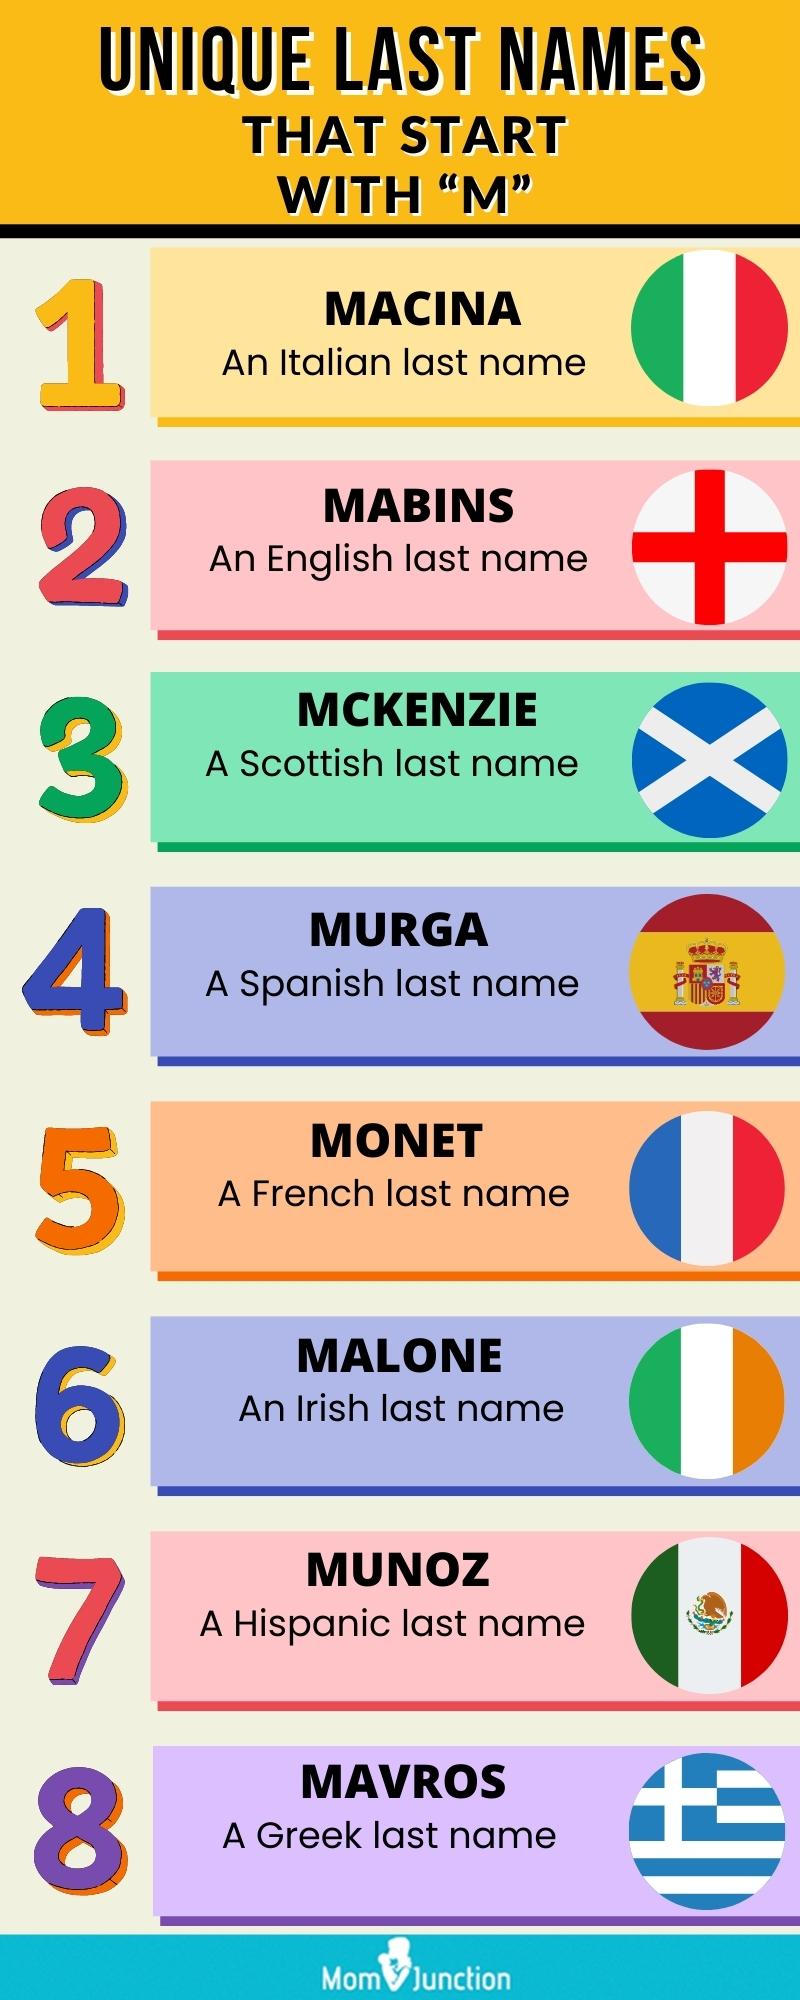 unique last names that start with m [infographic]